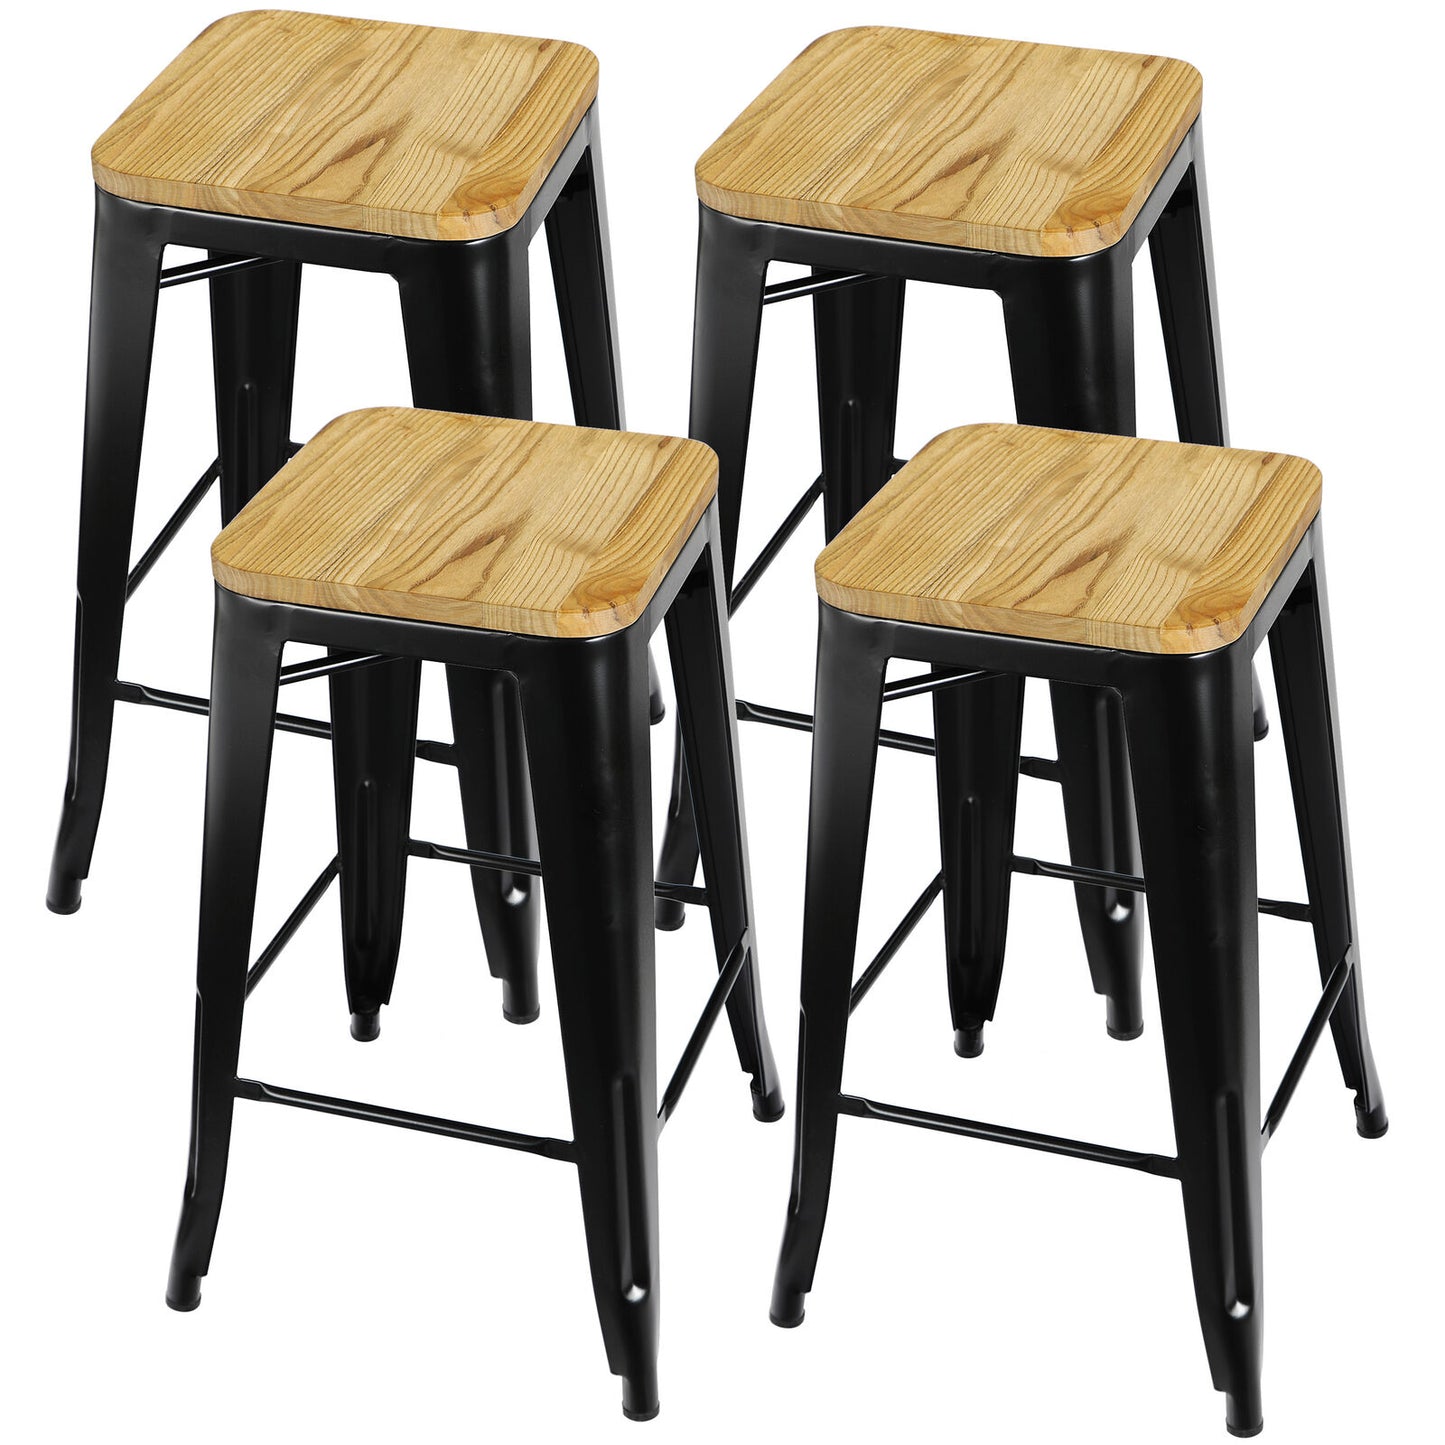 Set of 4 Metal Counter Bar Stools Pub Industrial 26" Height w/ Wood Seat 330LB